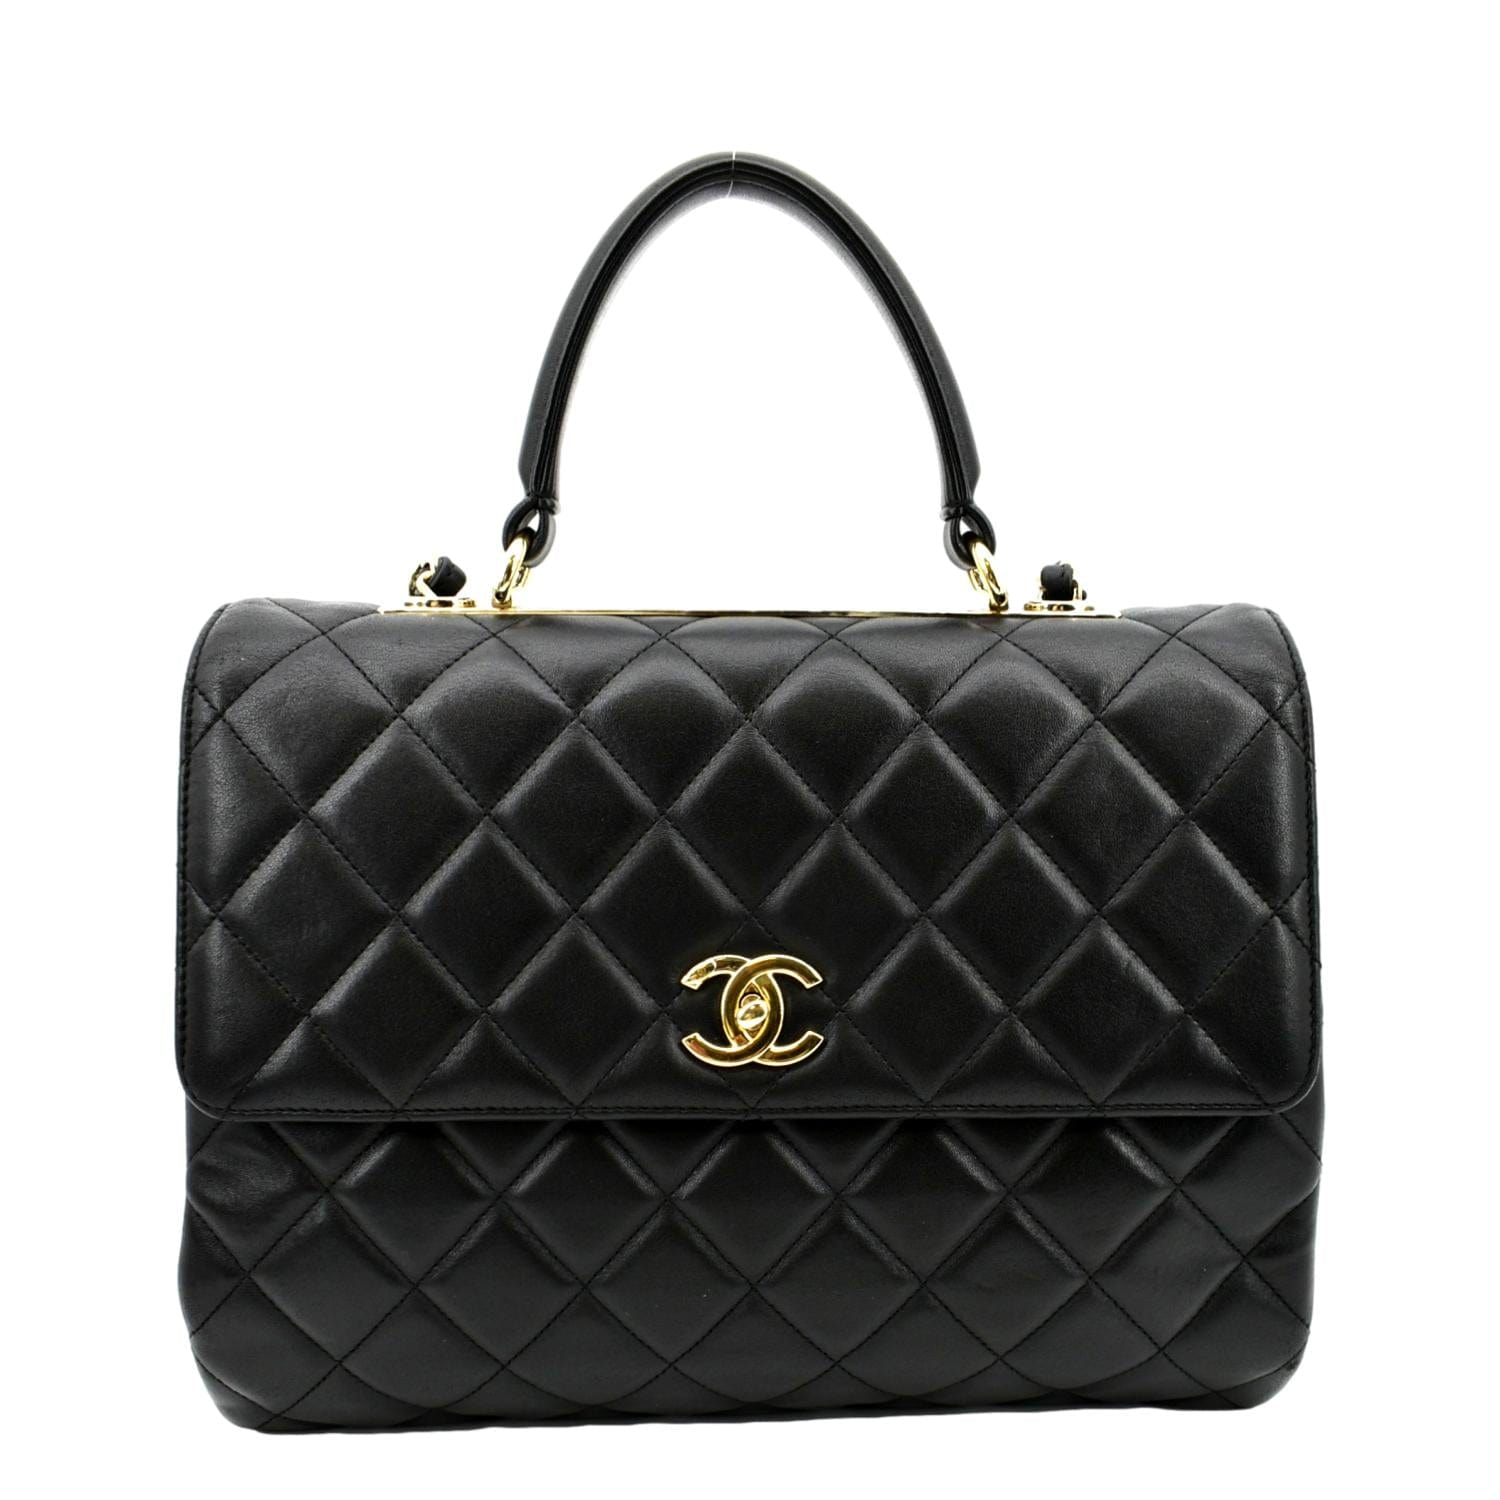 CHANEL Trendy CC Top Handle Flap Quilted Leather Shoulder Bag Black